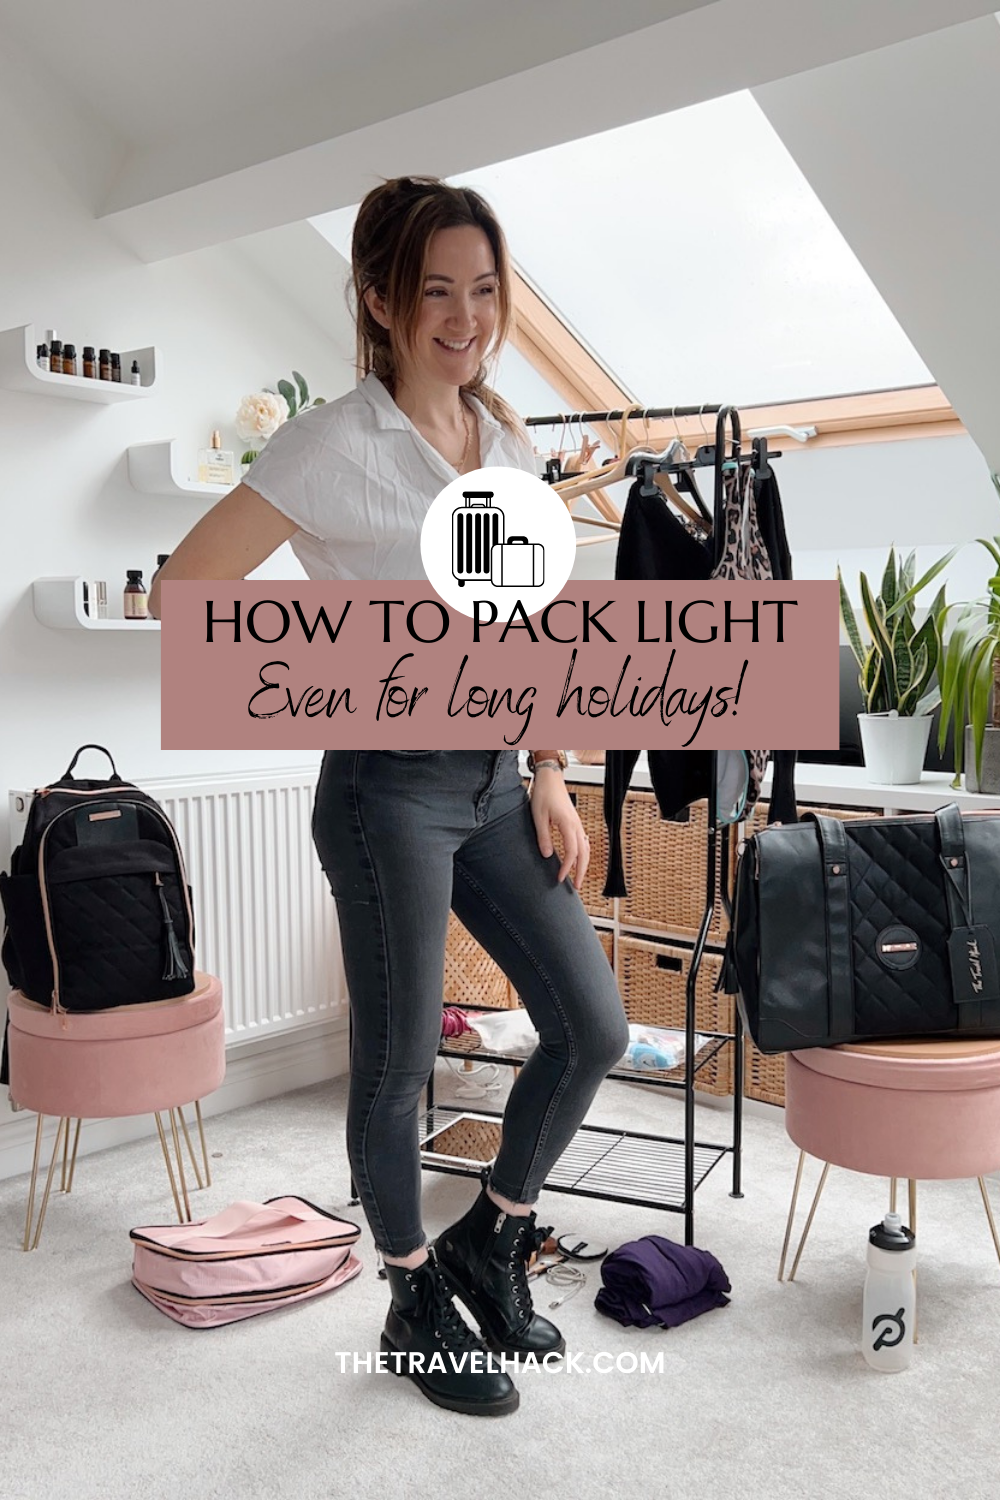 Holiday packing tips: 10 travel hacks to pack light for long holidays